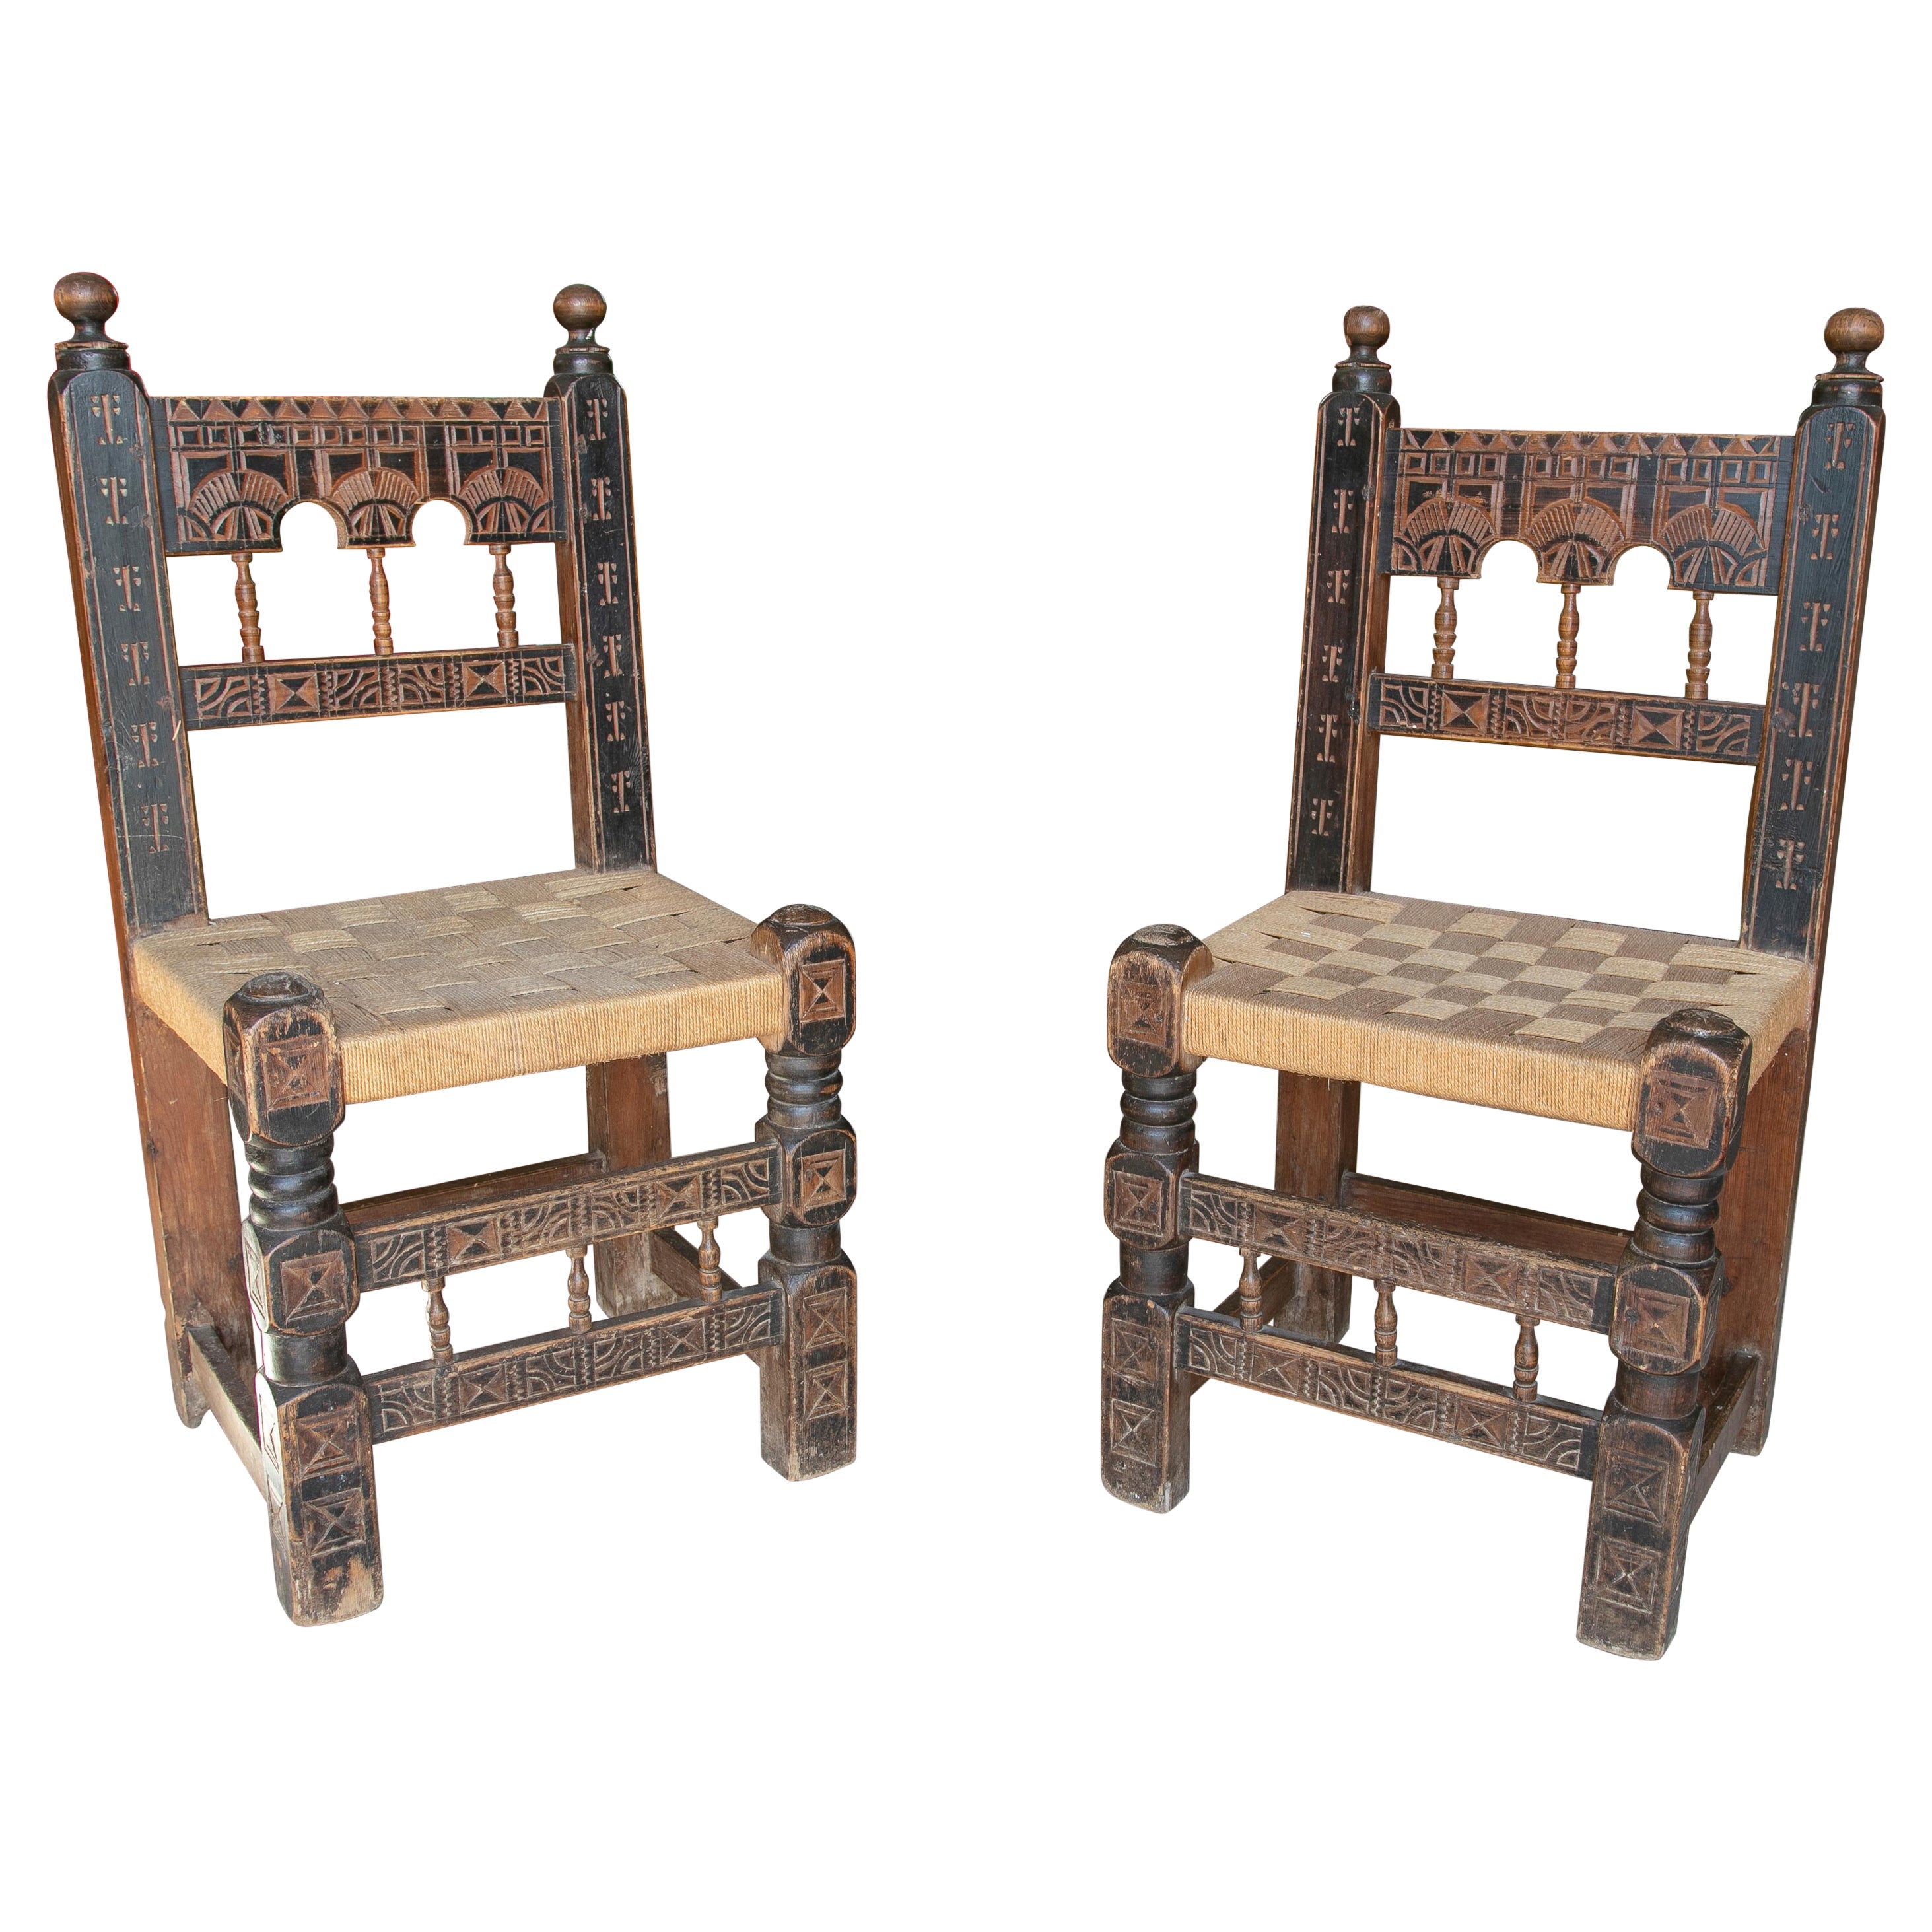 Pair of 1920s Spanish Hand Carved Painted Wooden Chairs w/ Woven Bulrush Seats